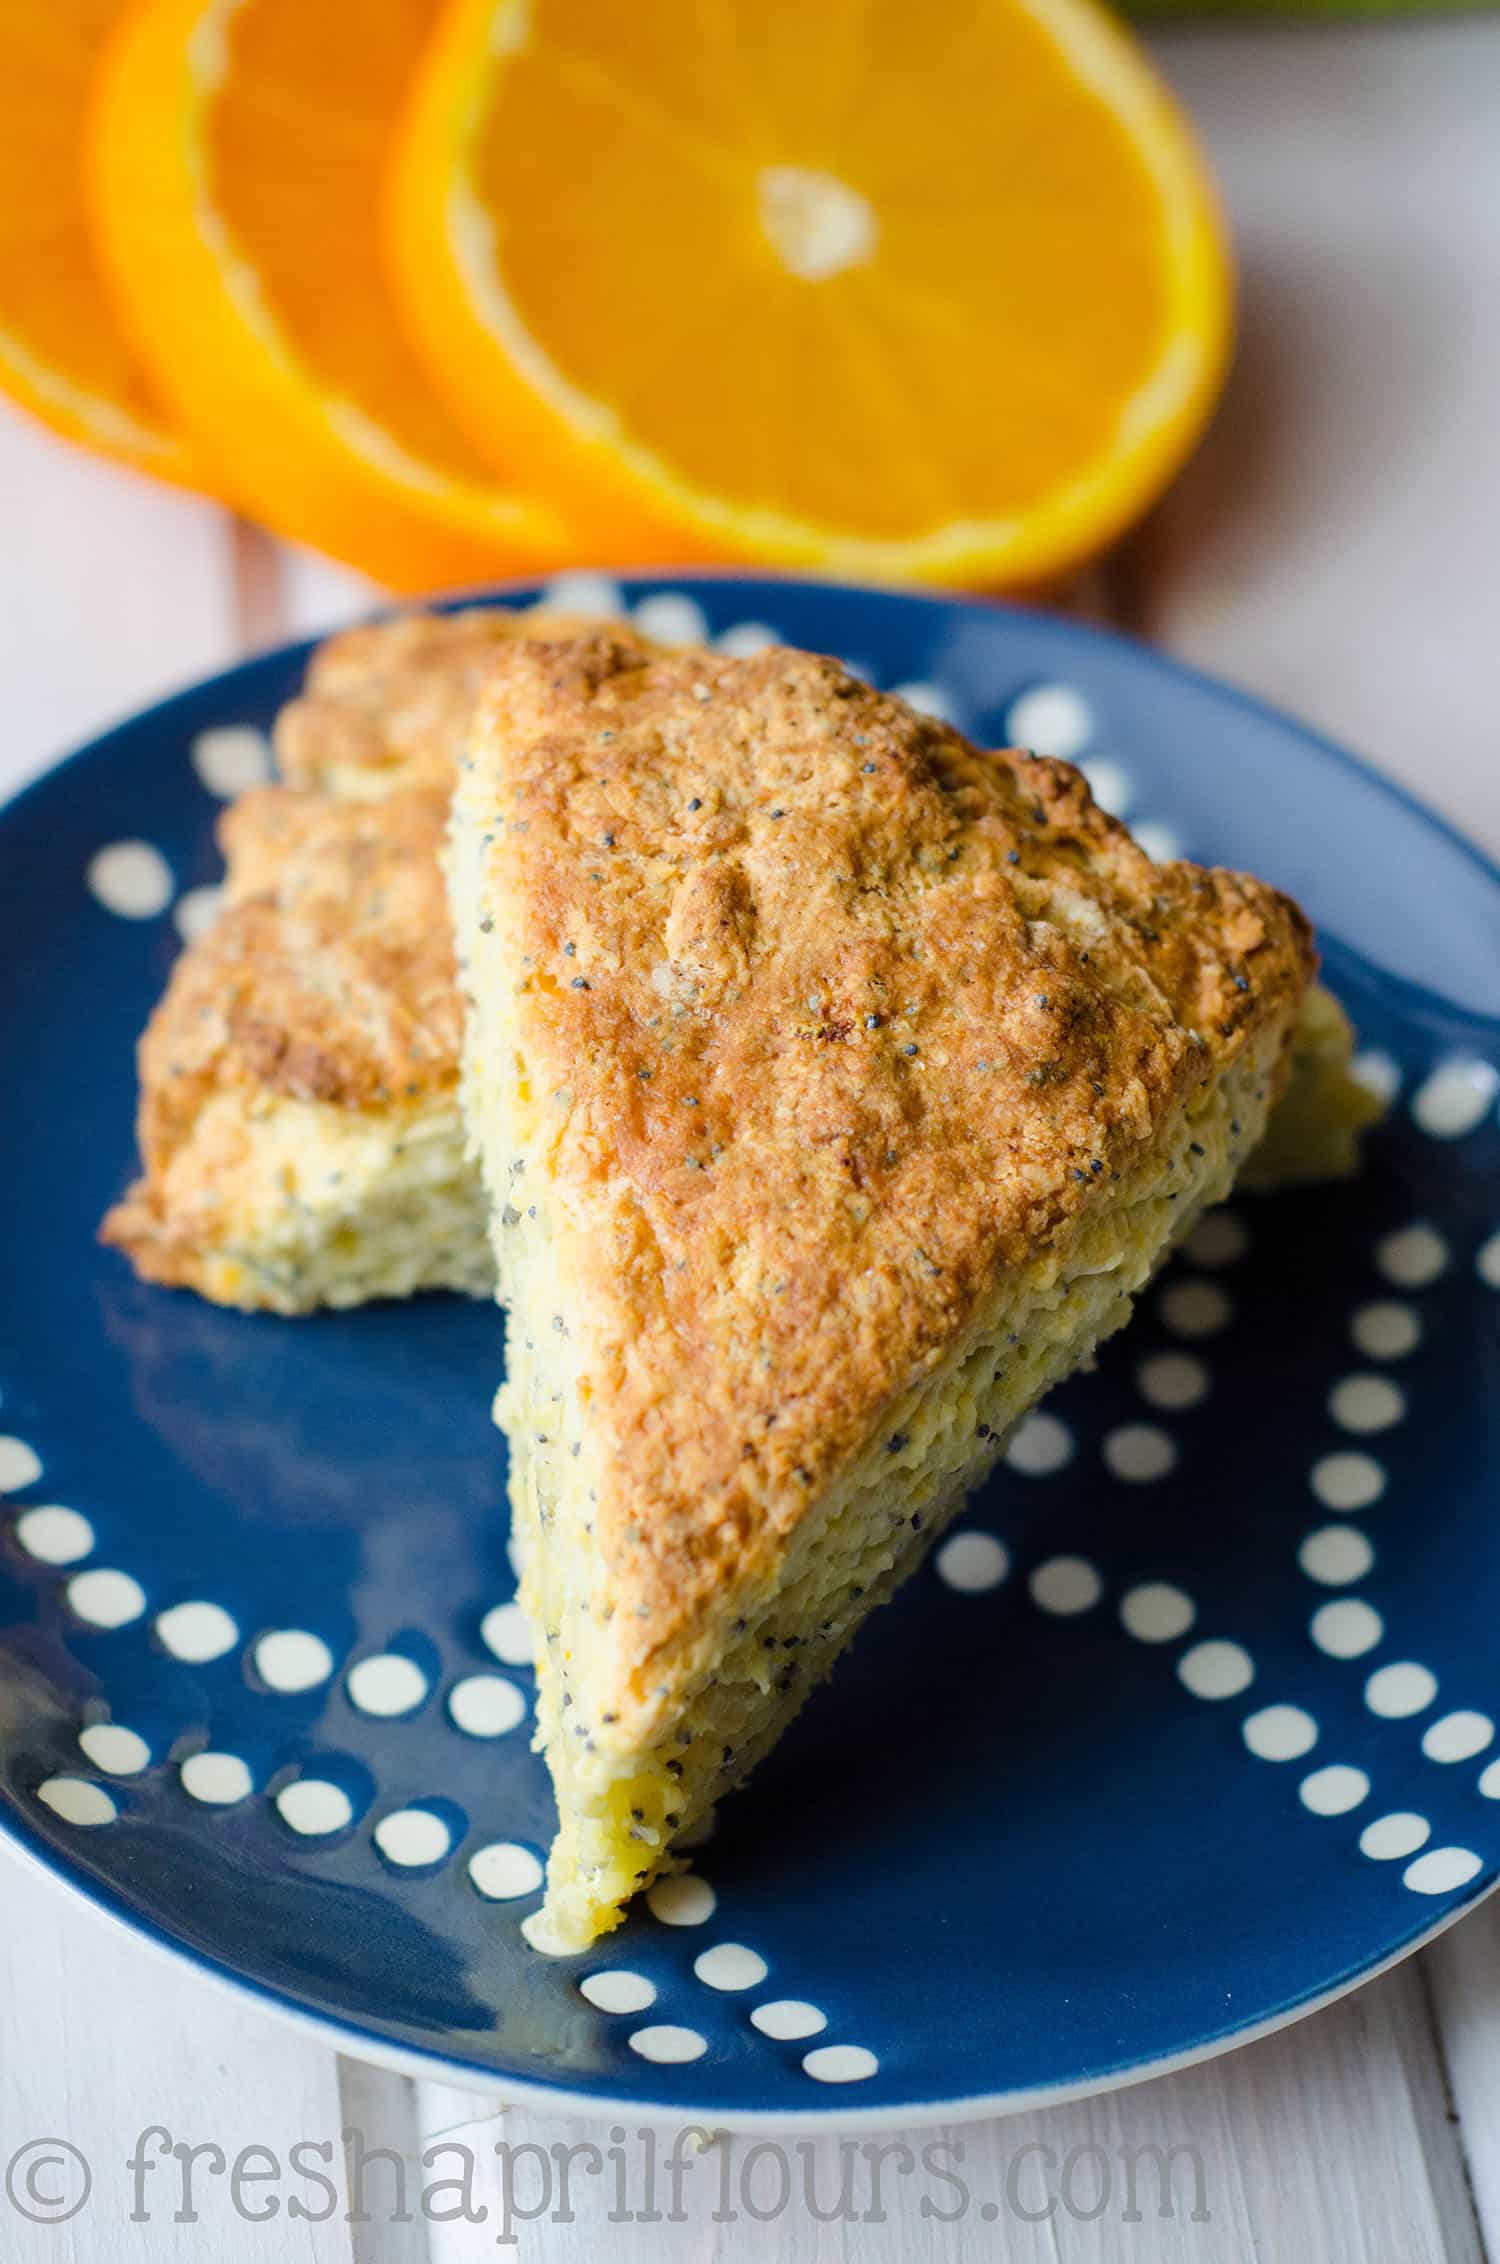 Orange Poppy Seed Scones: Bright and sunny scones that are full of tangy yet sweet orange flavor, made even better with an orange simple syrup soak.